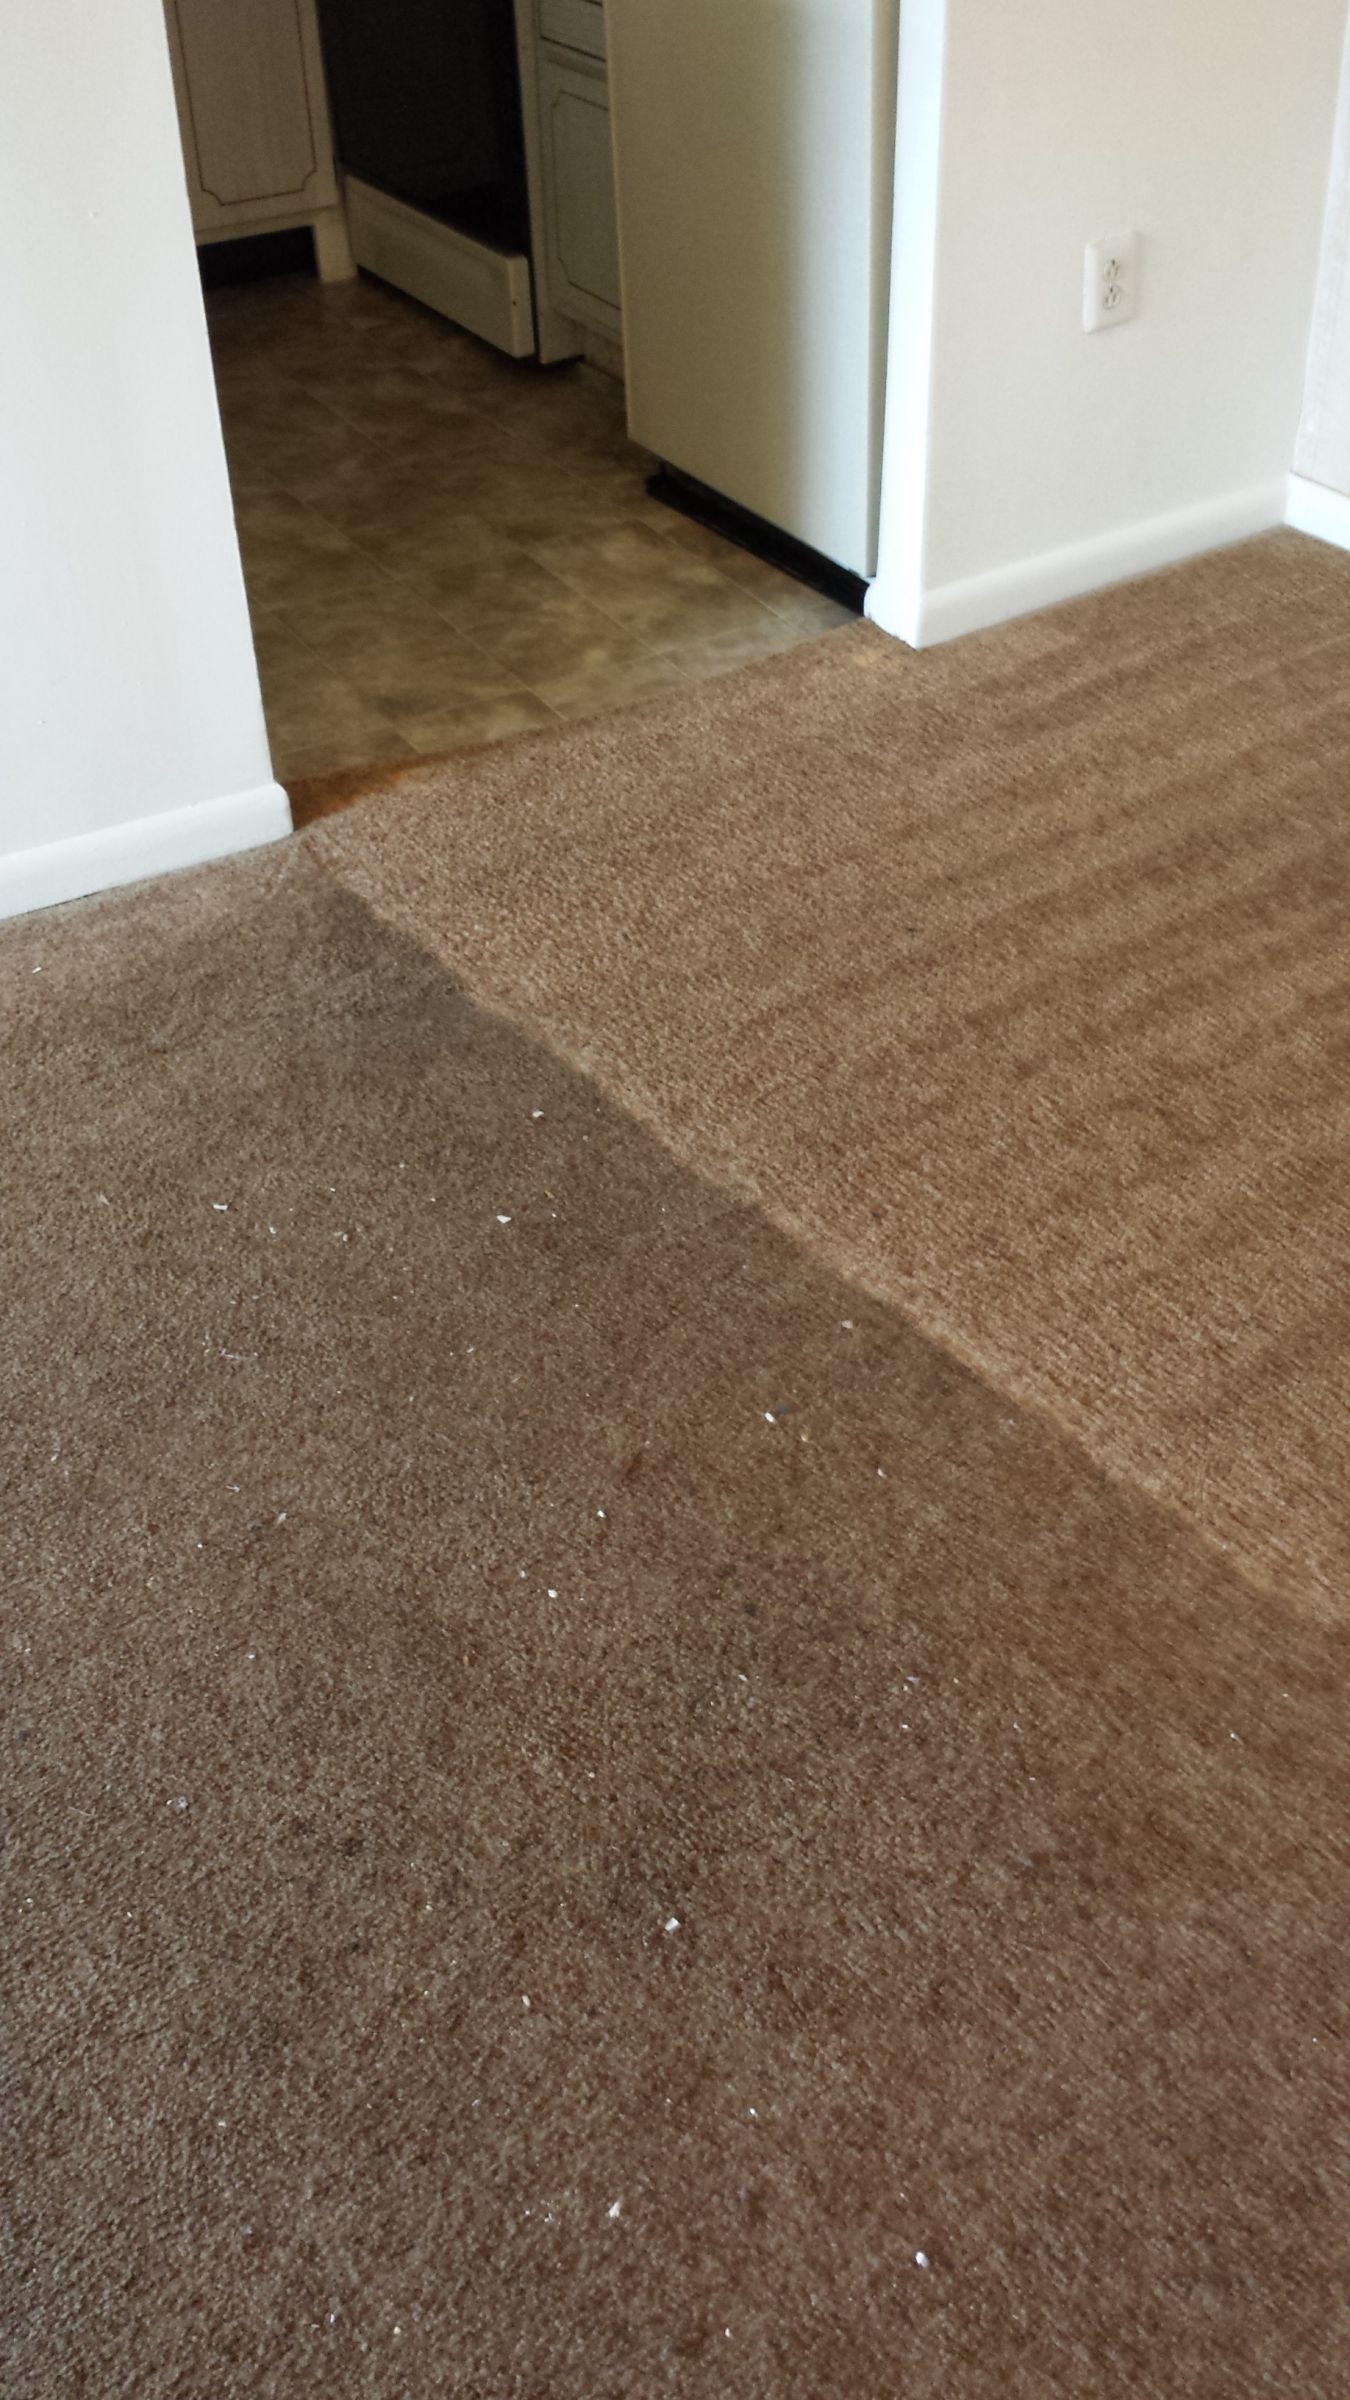 Blackwood Carpet Cleaning. Know Your Carpet Type Before Cleaning